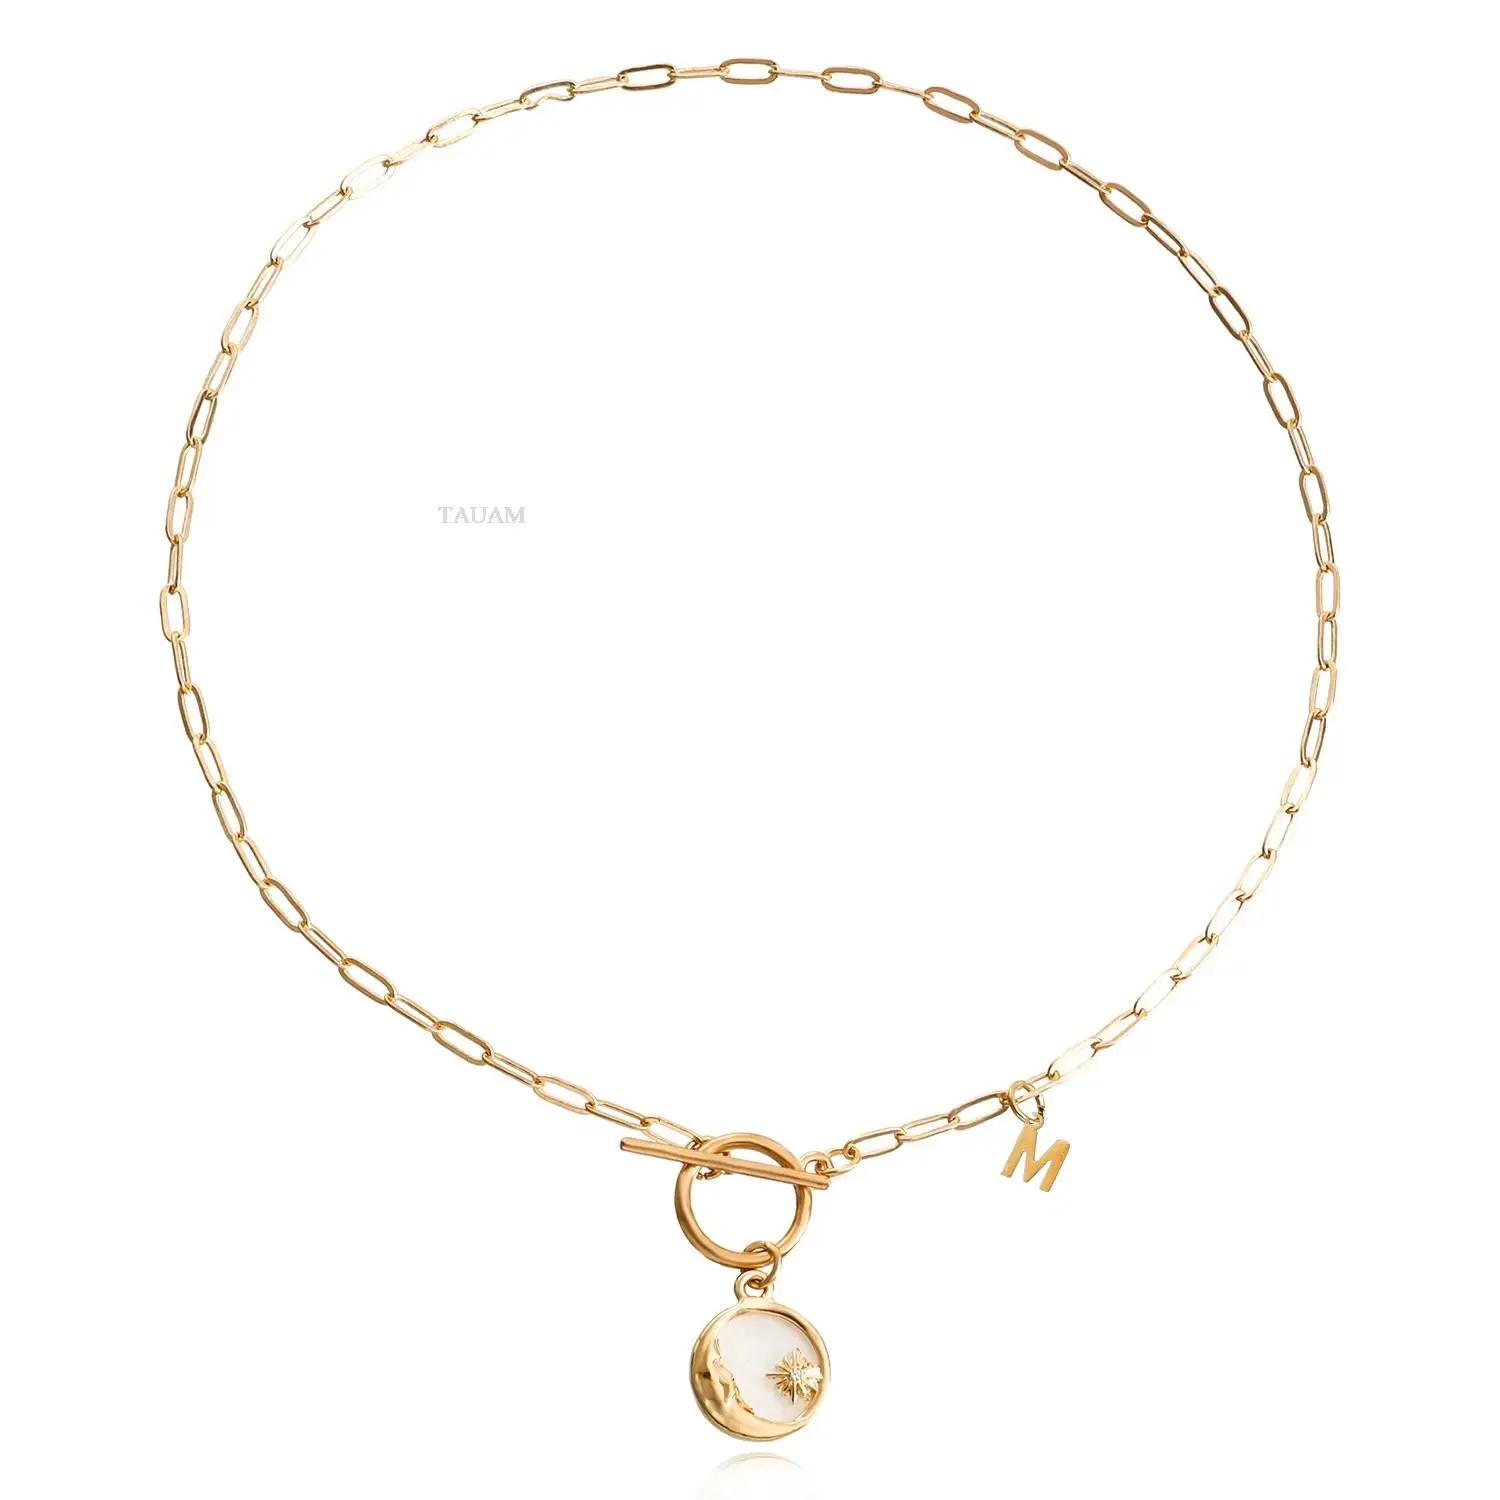 

TAUAM Initial Fashion Necklaces Pearl Gold Color Letter Chain Pendant Choker for Women Vintage Summer Jewelry